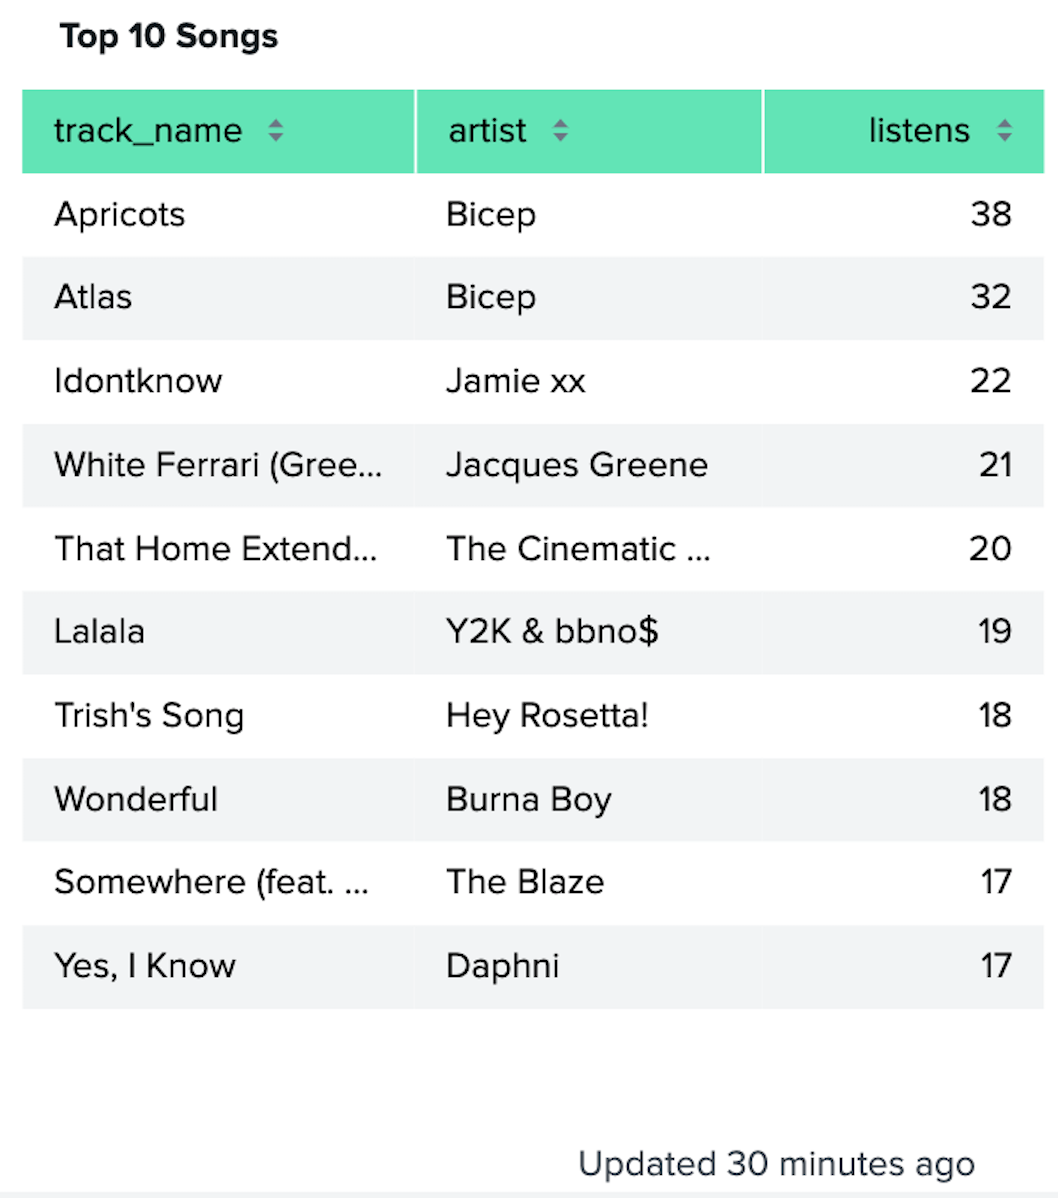 Screenshot of Splunk table with top 10 songs of last.fm data, Apricots by Bicep with 38 listens, Atlas by Bicep with 32 listens, Idontknow by Jamie xx with 22 listens, White Ferrari (Greene Edit) by Jacques Greene with 21 listens, That Home Extended by The Cinematic Orchestra with 20 listens, Lalala by Y2K and bbno$ with 19 listens, Trish's Song by Hey Rosetta! with 18 listens, Wonderful by Burna Boy with 18 listens, Somewhere feat. Octavian by the Blaze with 17 listens, and Yes, I Know by Daphni with 17 listens. 